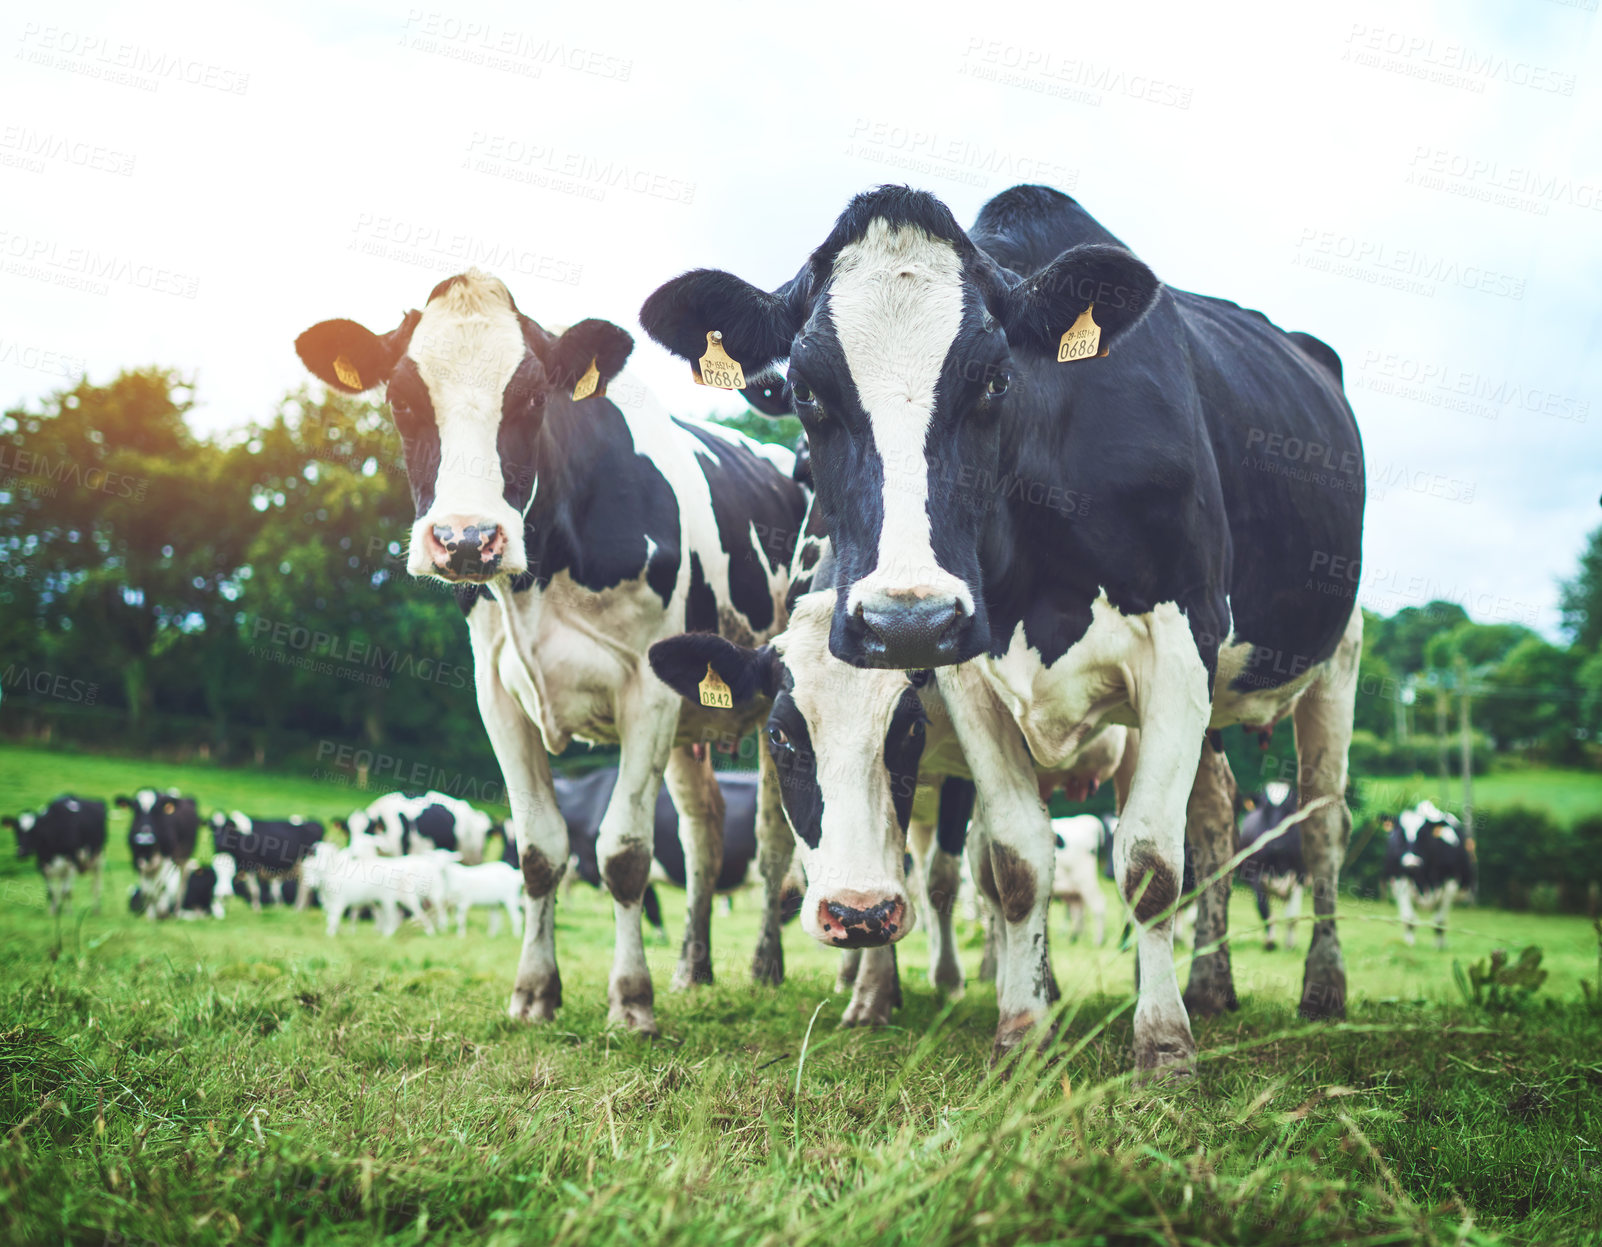 Buy stock photo Sustainable, herd and cows on an agriculture farm walking and eating grass on an agro field. Ranch, livestock and group of cattle animals in dairy, eco friendly and farming environment in countryside